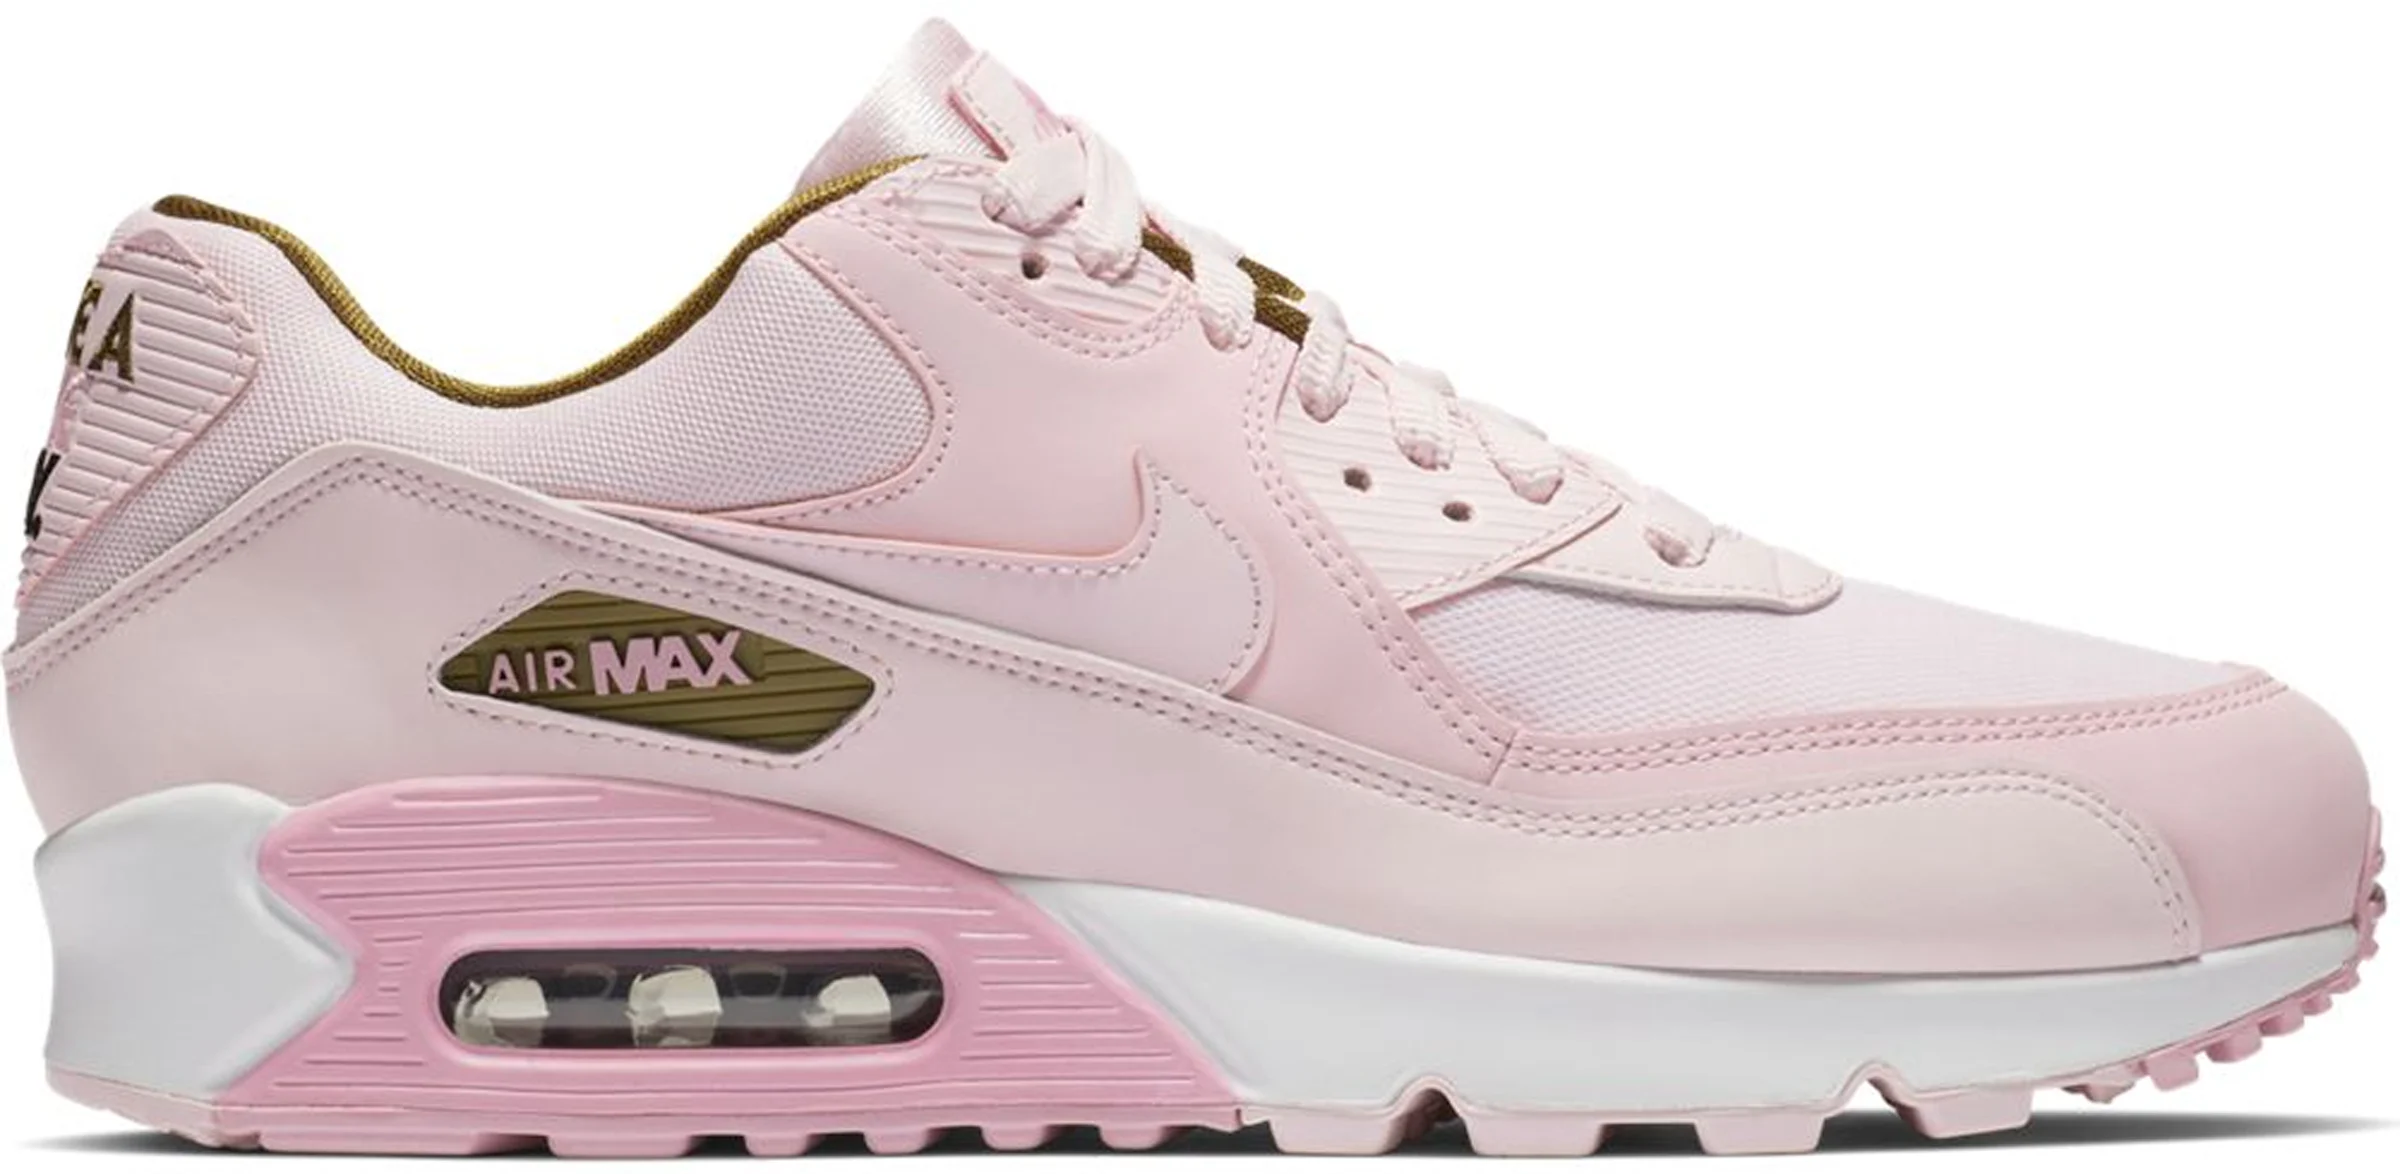 Nike Air Max 90 Have a Nike Day Pink Foam (Women's) - 881105-605